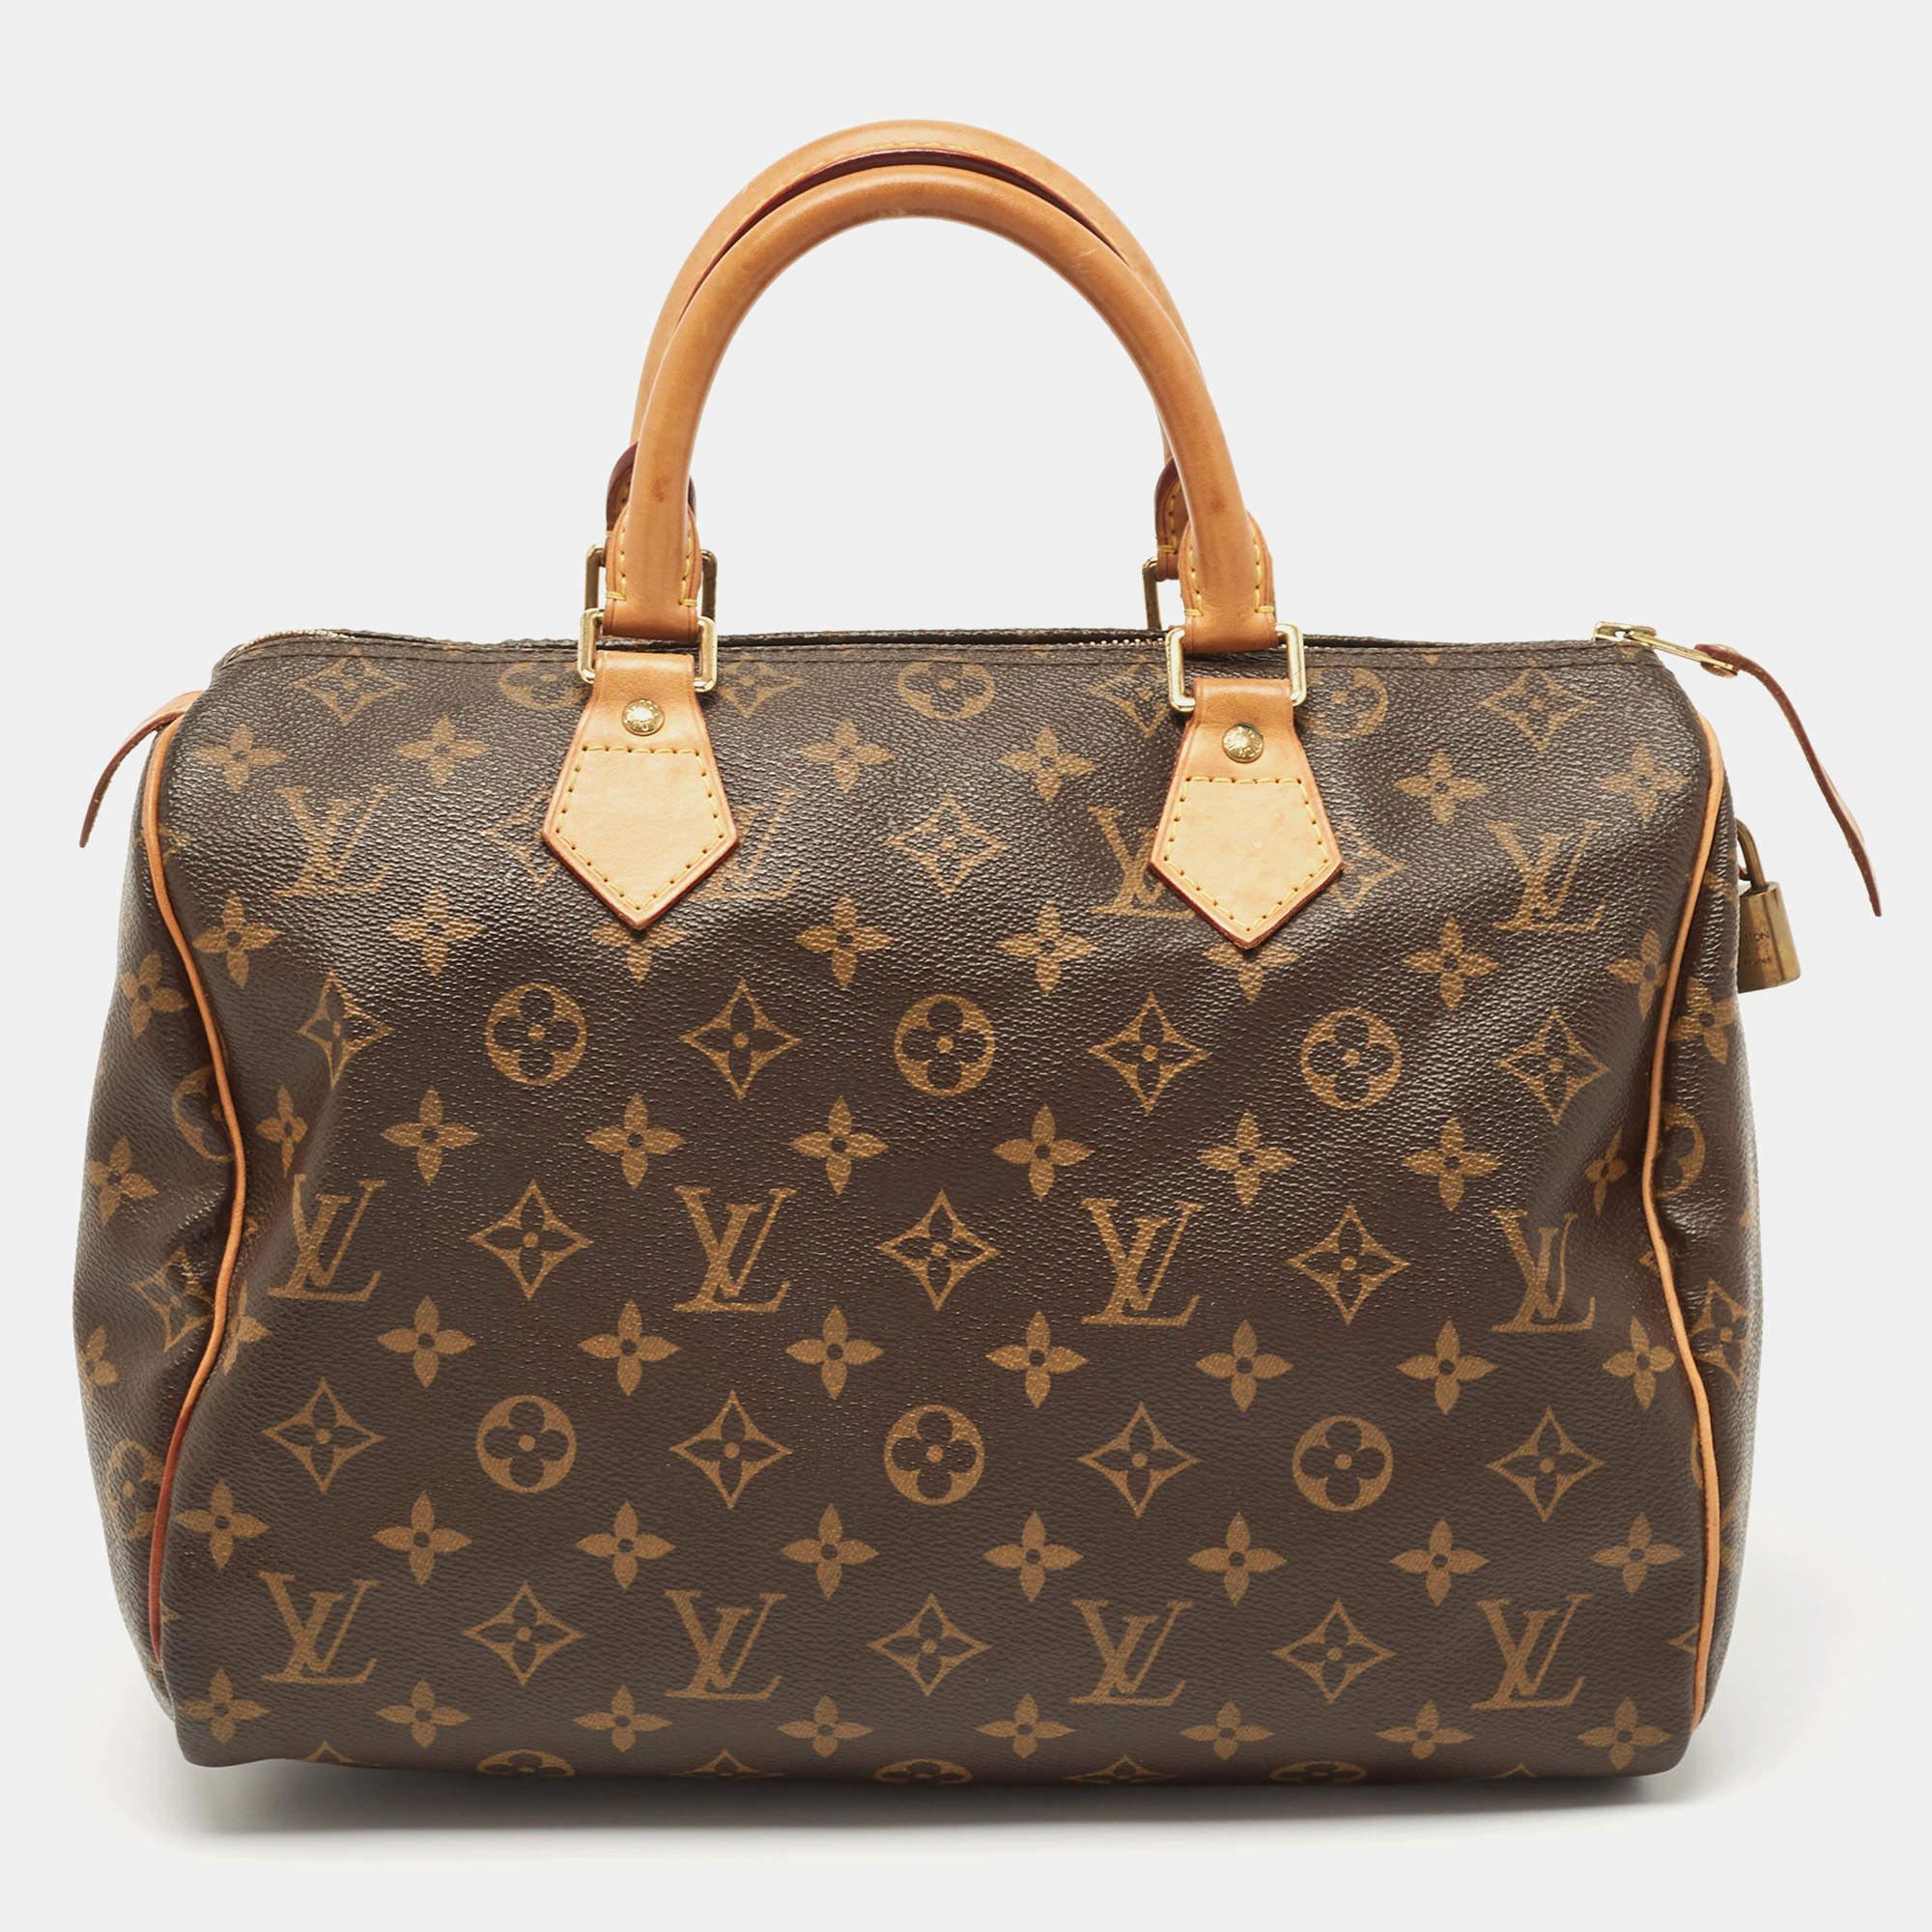 Created to provide you with everyday ease, this Louis Vuitton Speedy 30 bag features dual top handles and a roomy canvas-lined interior. The usage of signature Monogram canvas in its construction offers instant brand identification. Gold-tone